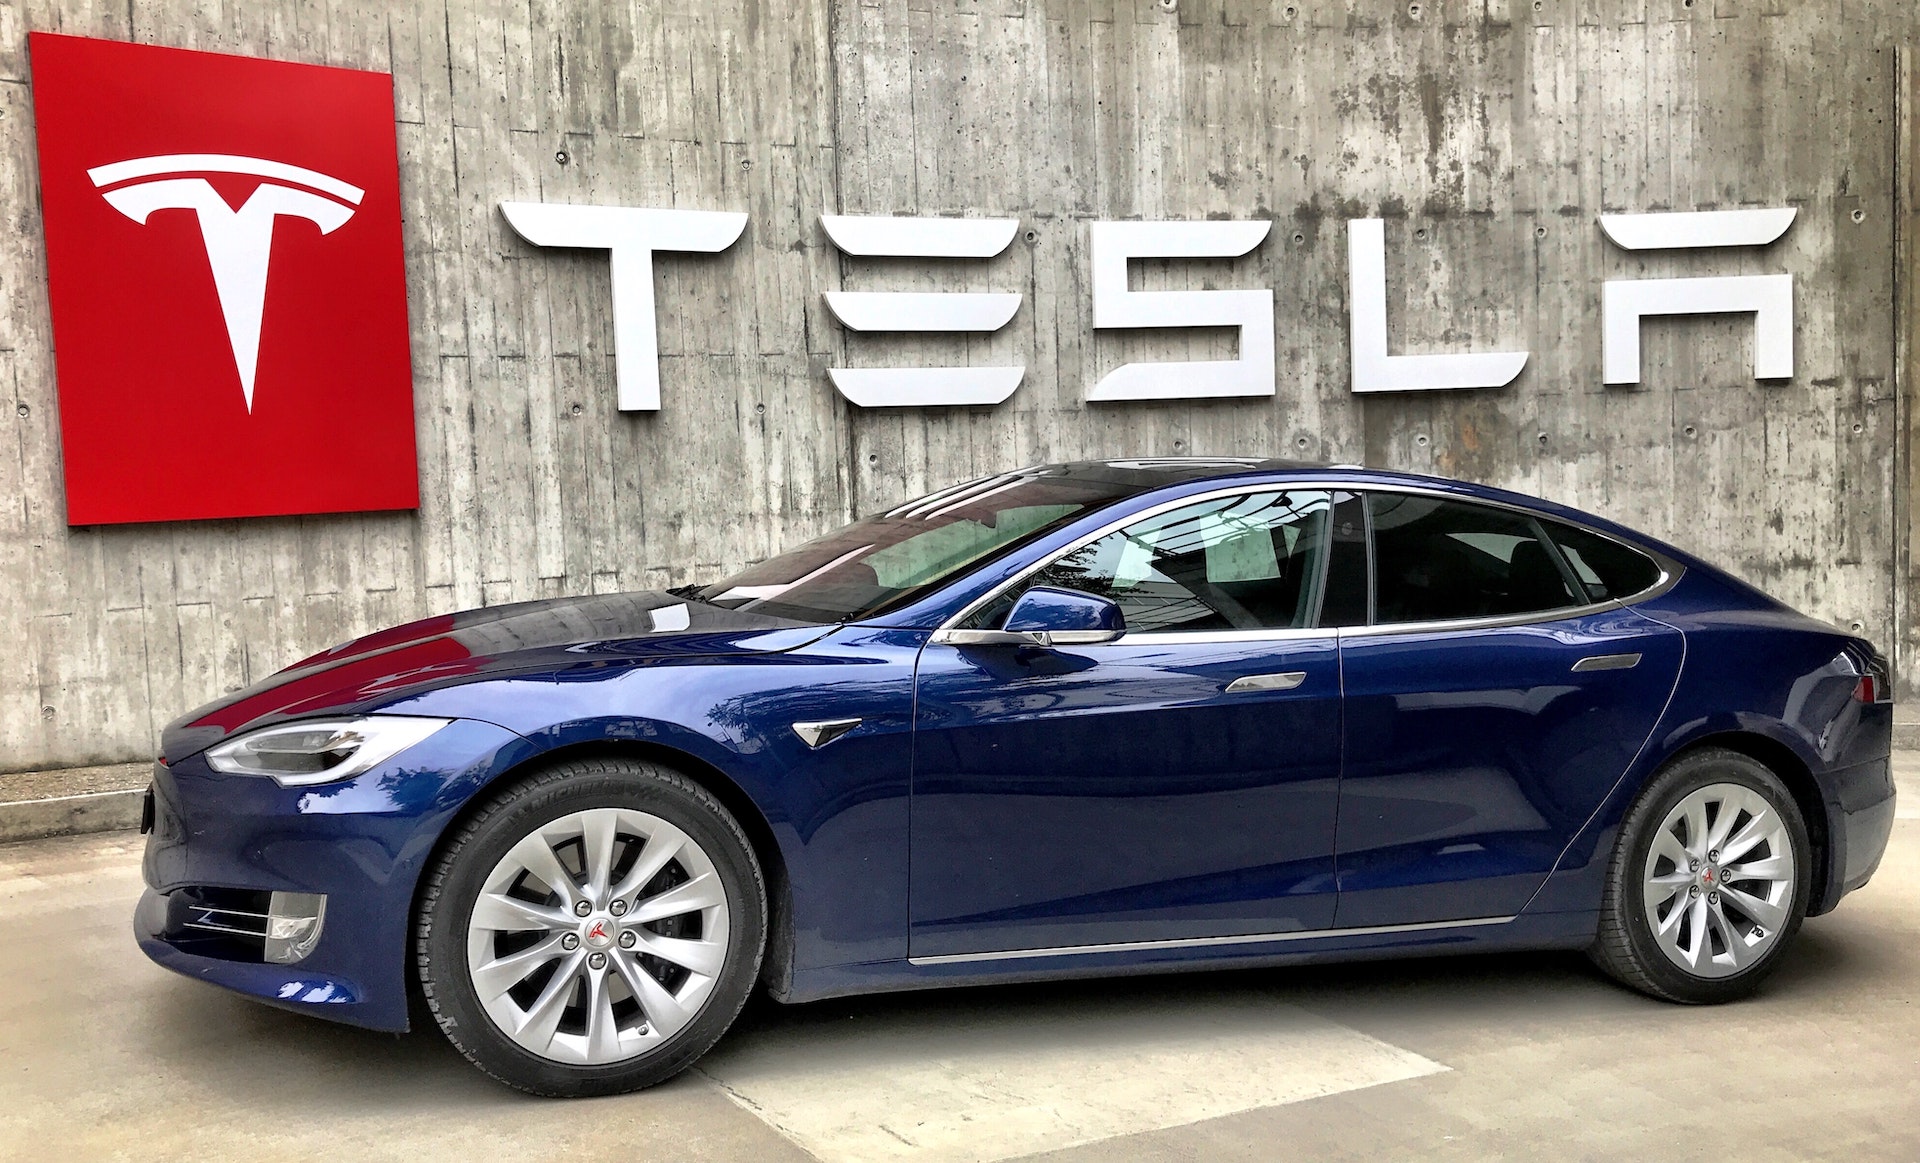 Tesla delivered a record-breaking 343,830 cars